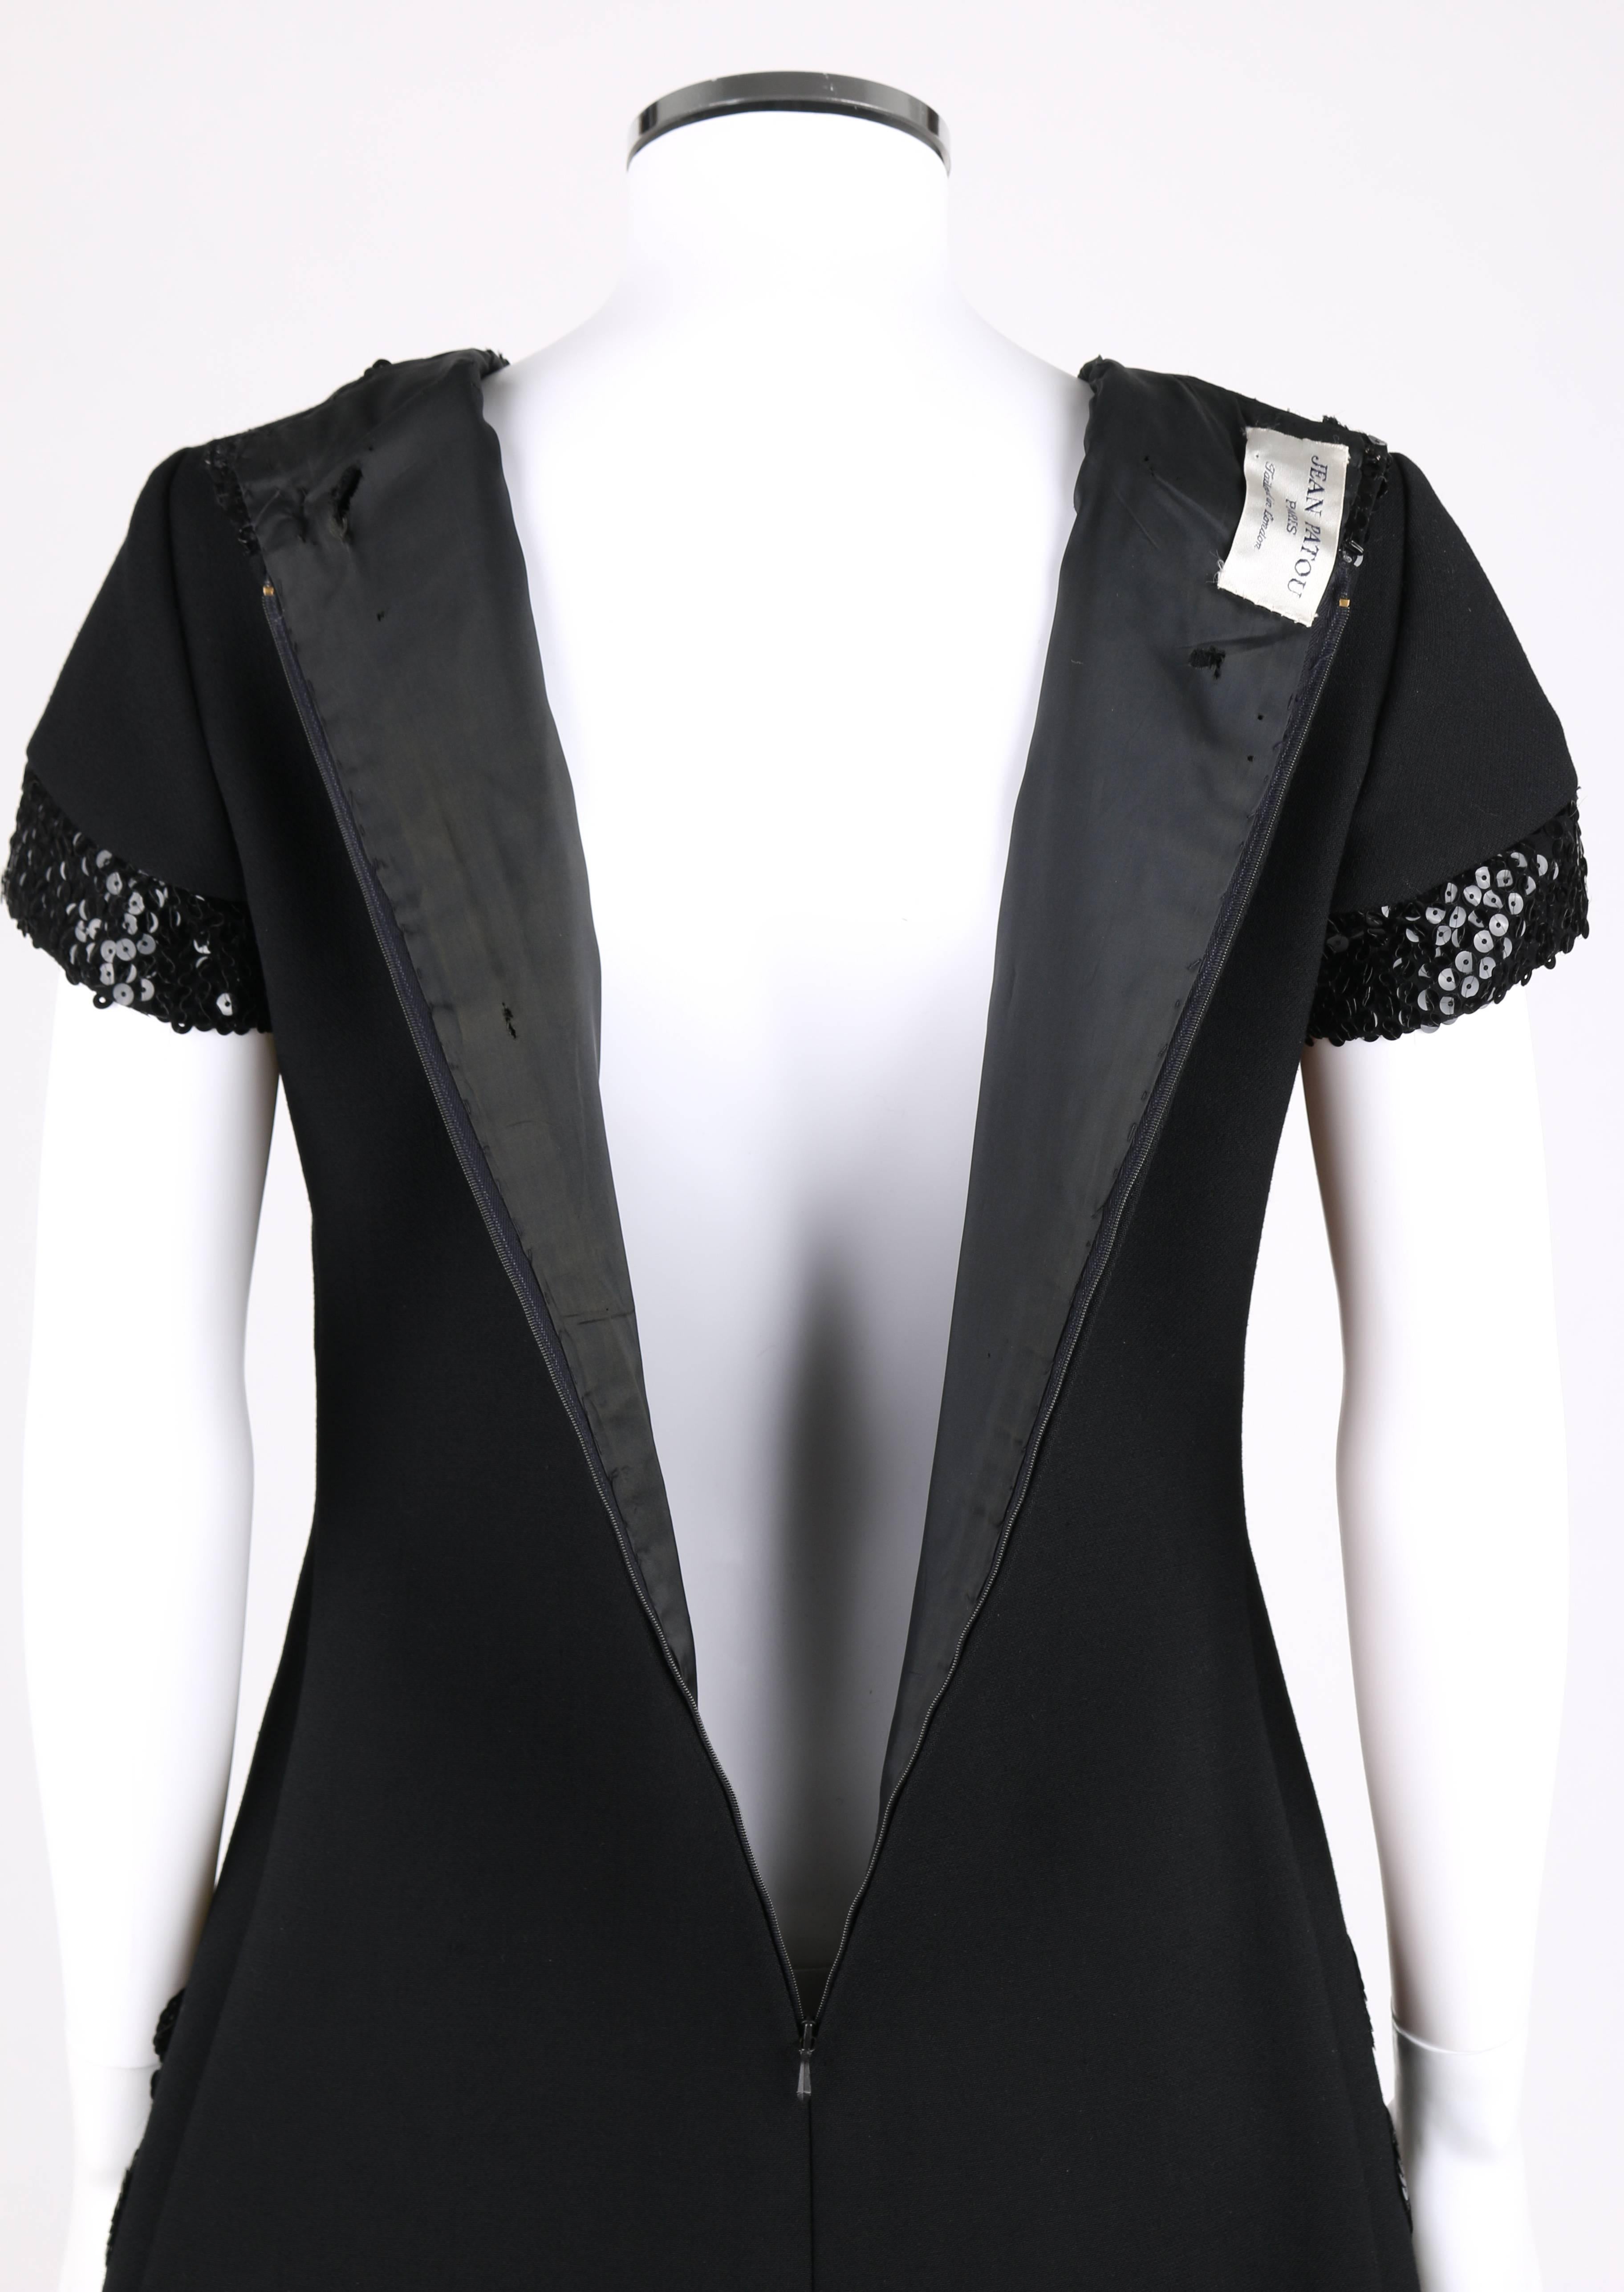 JEAN PATOU c.1960's KARL LAGERFELD Black Sequin Camellia Flower Cocktail Dress In Excellent Condition For Sale In Thiensville, WI